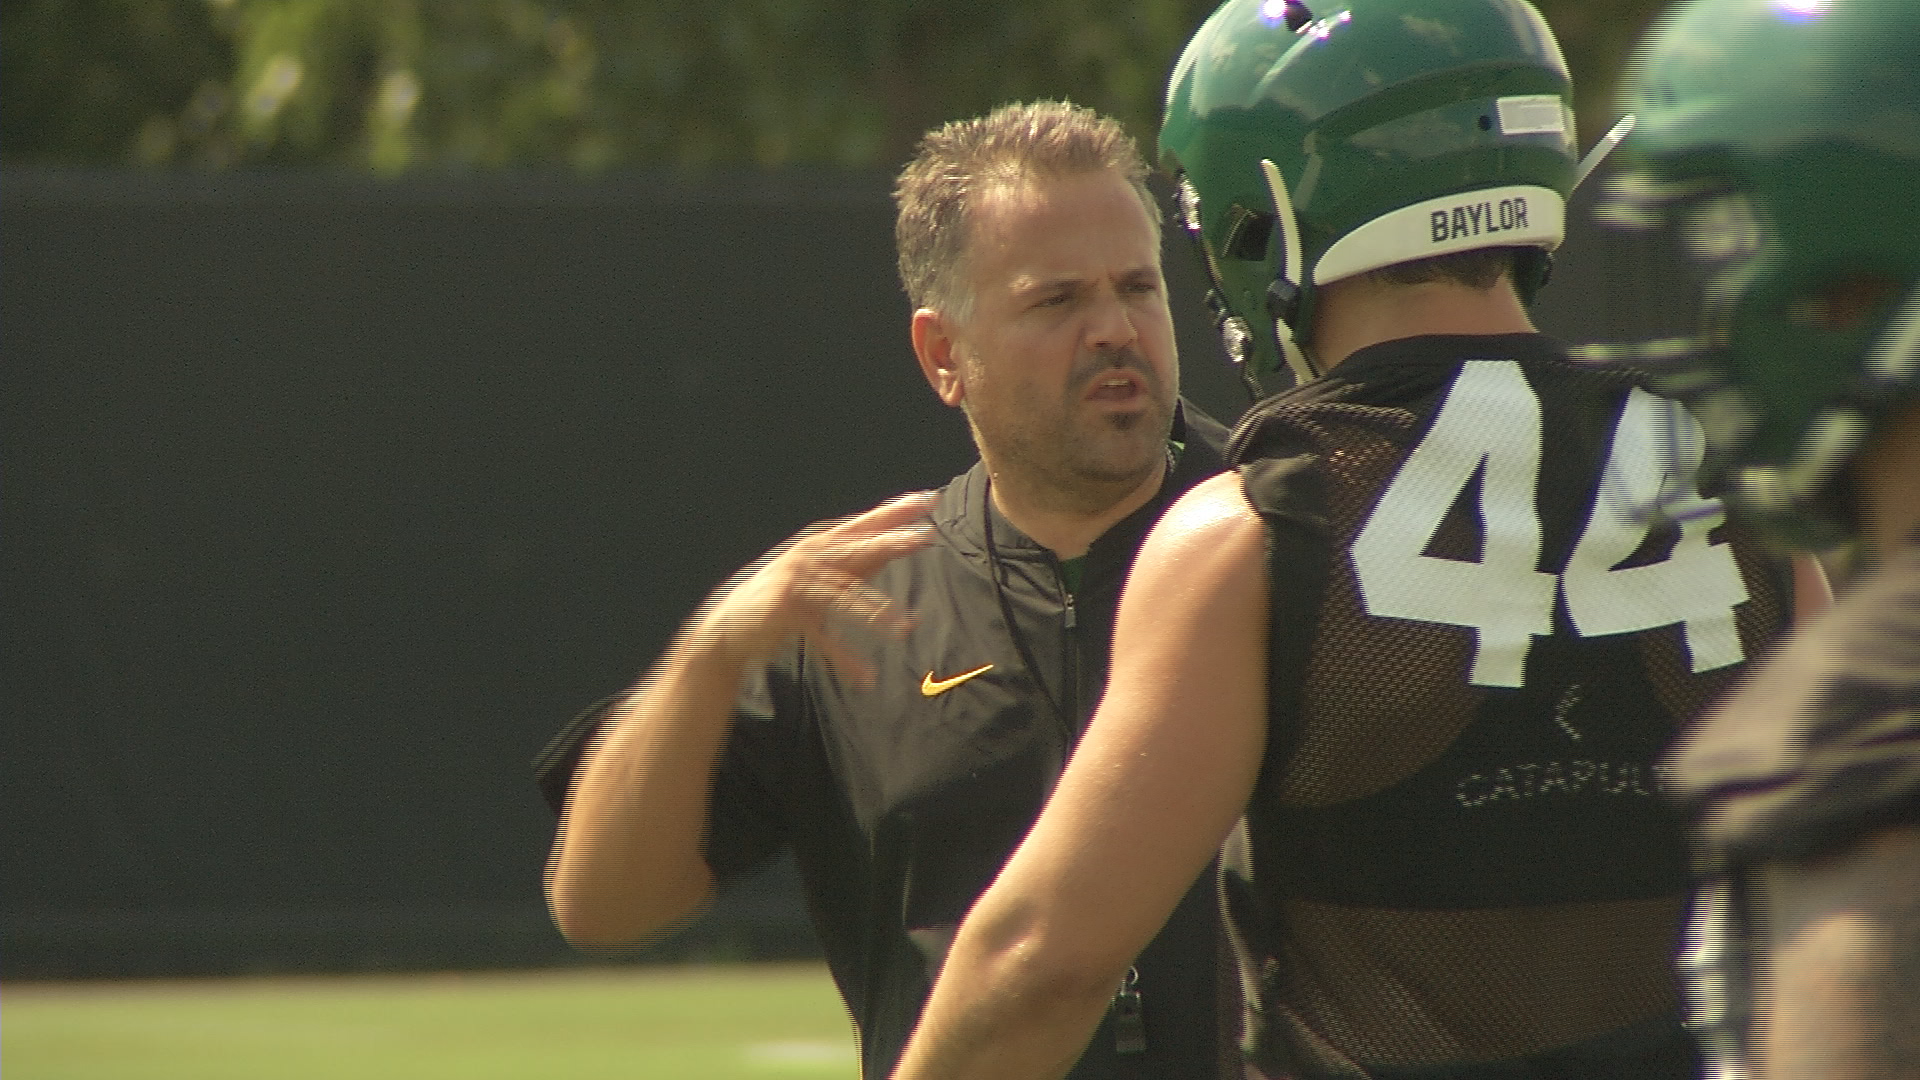 When Matt Rhule took over Baylor football, his team went 1-11. Two years later, the Bears flipped that record.